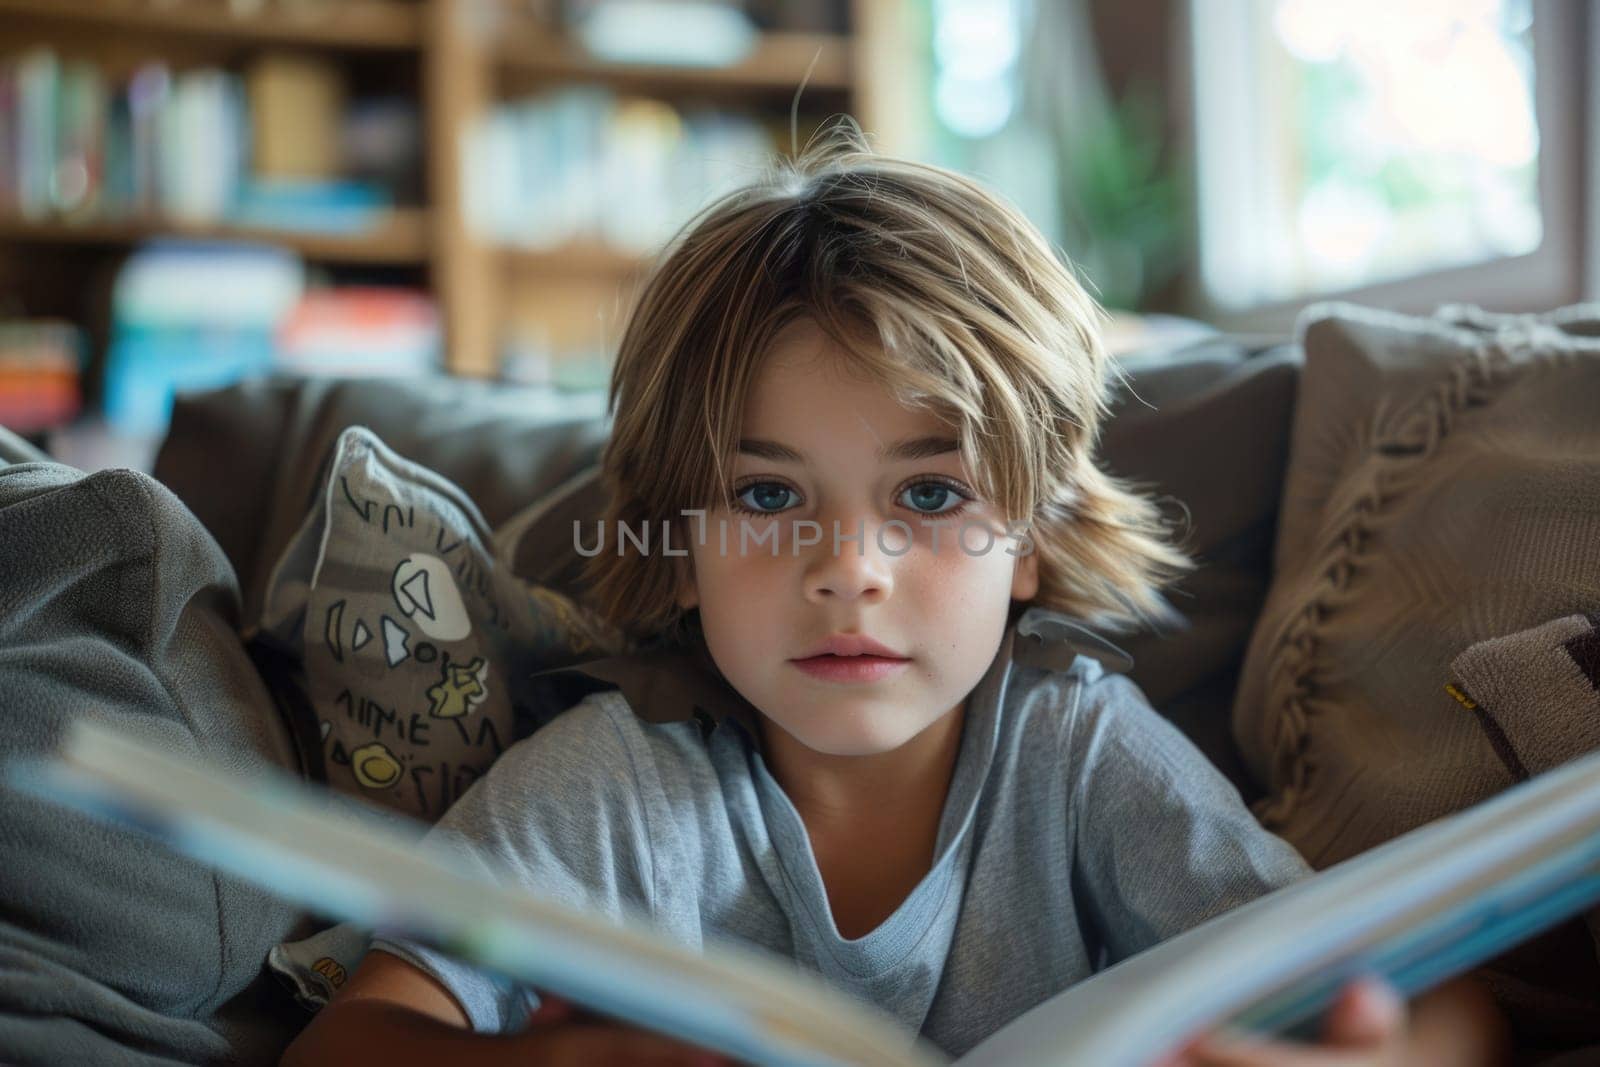 Cute boy reading a book and smiling while sitting on a sofa in the room. ai generated by Desperada